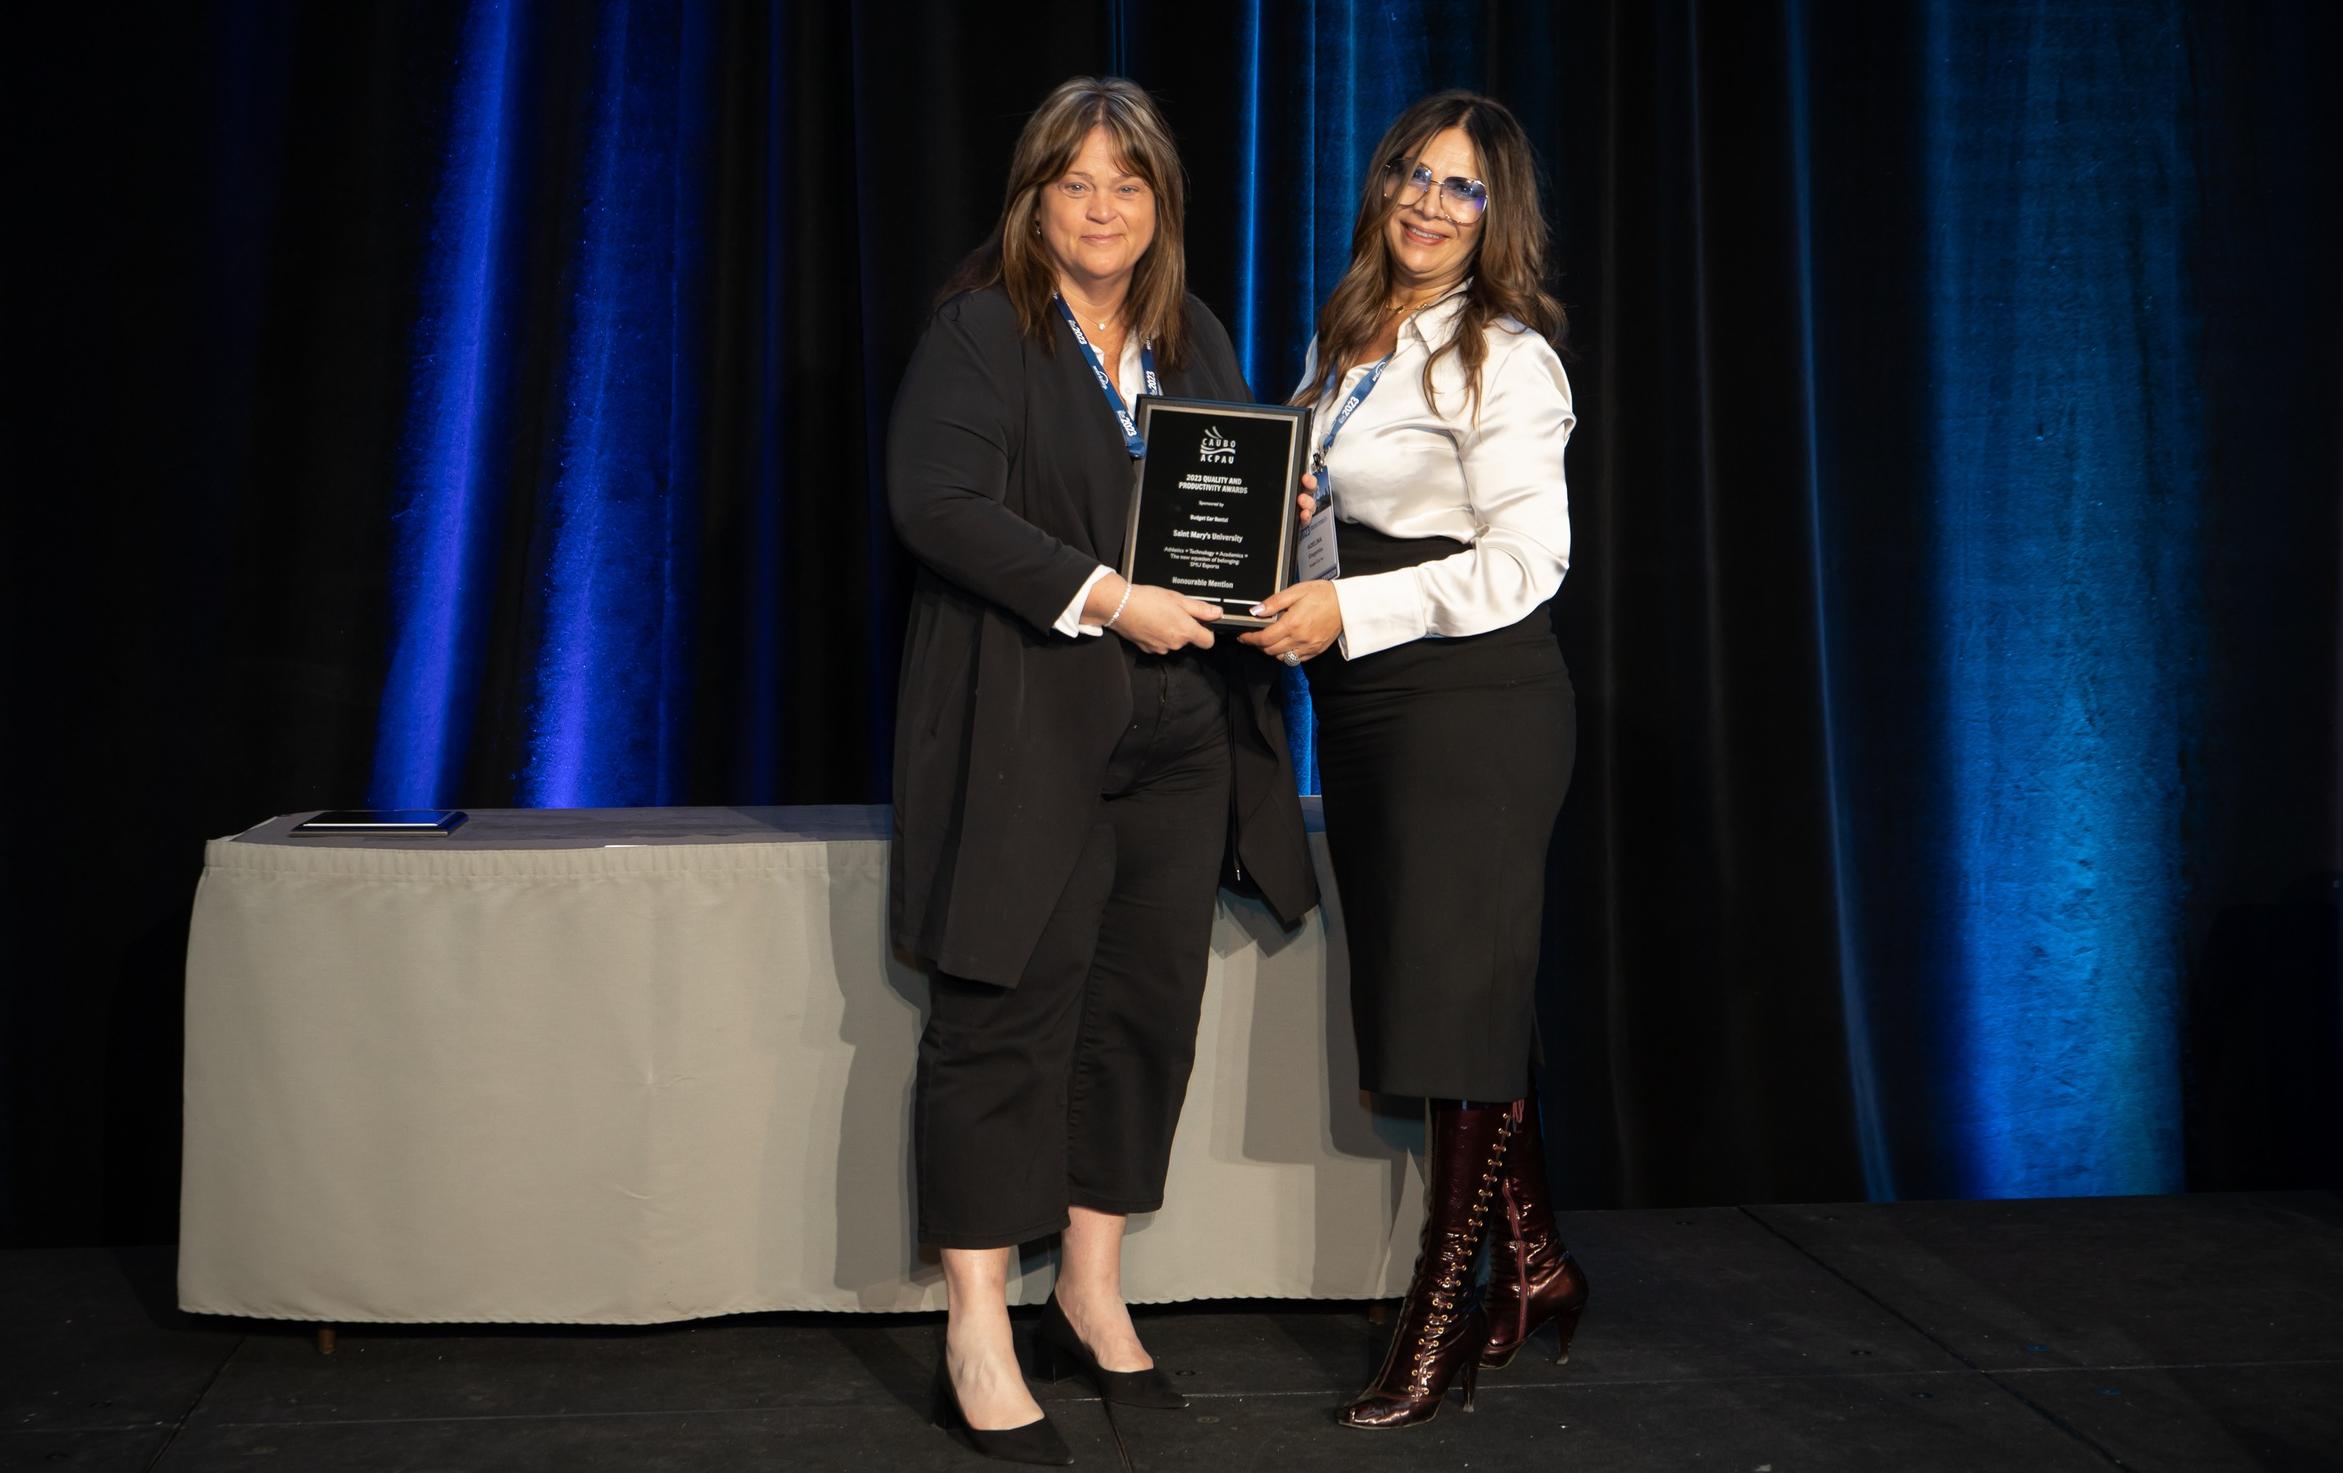 Michelle Benoit, Saint Mary's University Vice-President, Finance and Administration, accepts the 2023 CAUBO Quality and Productivity Award on behalf of the Huskies Esports project team at the CAUBO Conference in Toronto. (Photo courtesy: CAUBO)